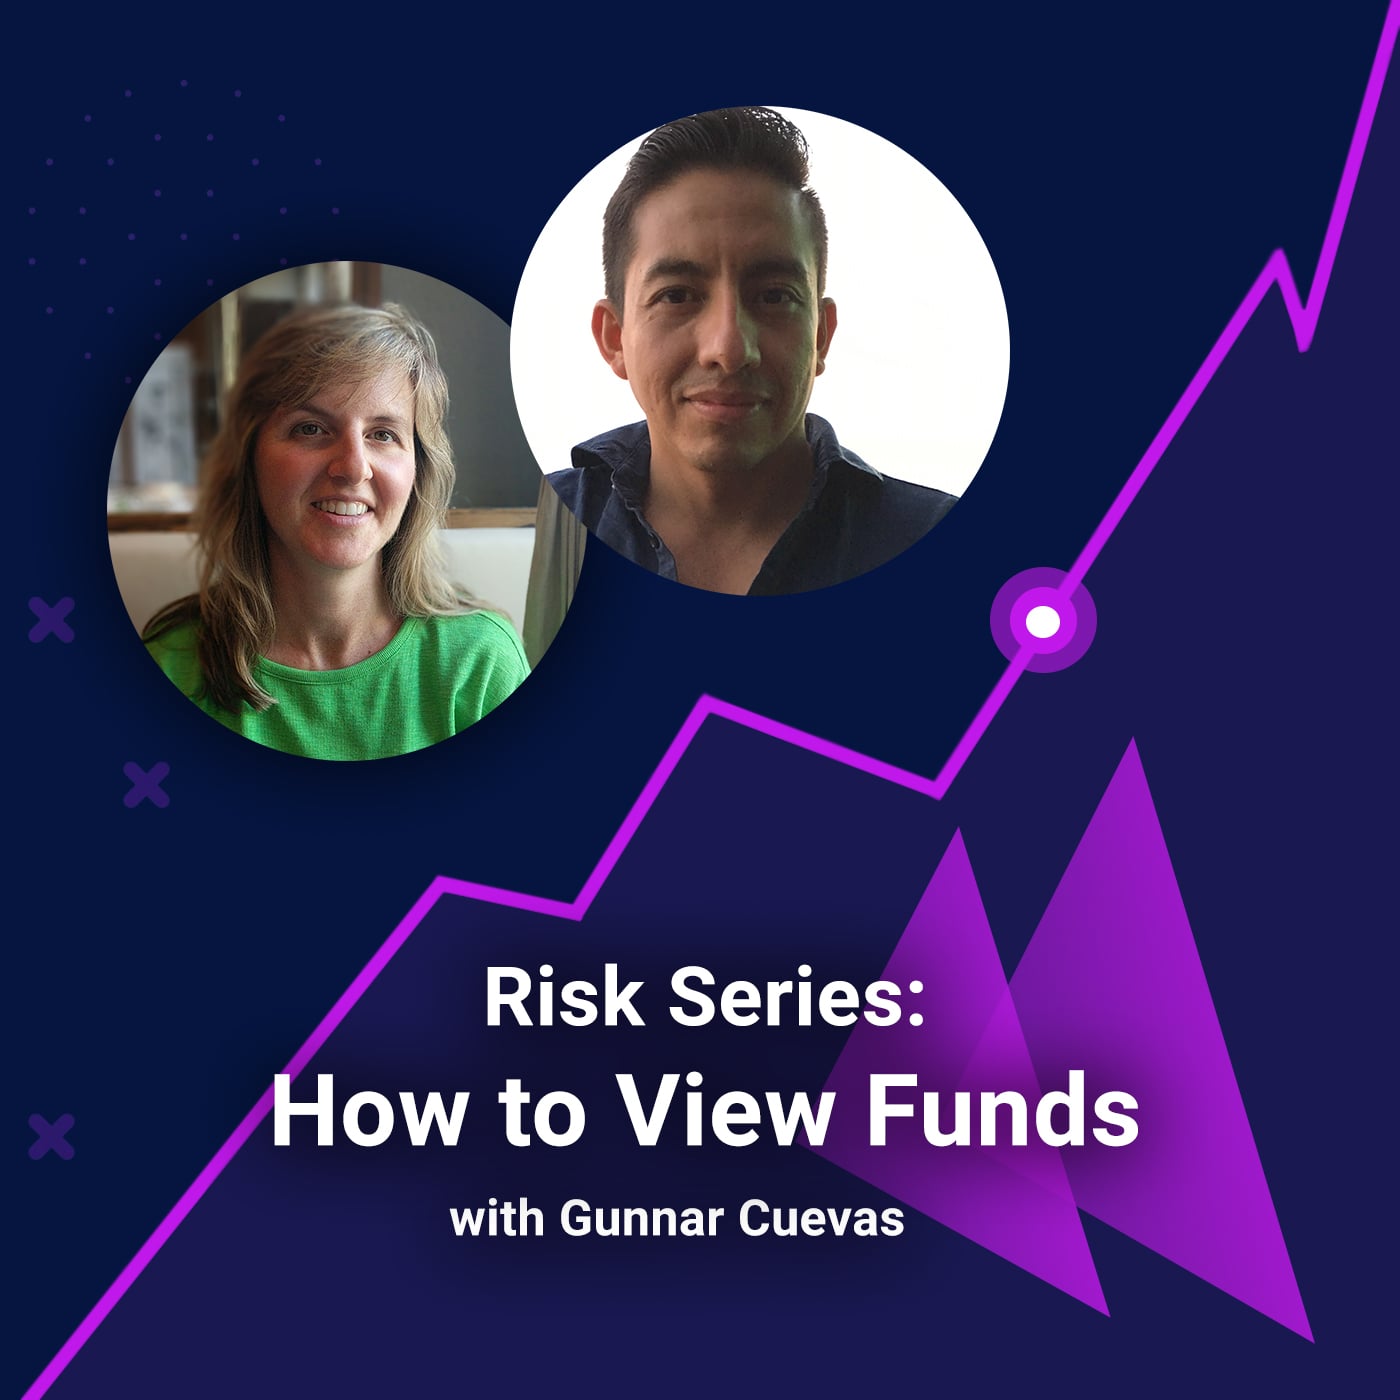 Risk Series - How to View Funds with Gunnar